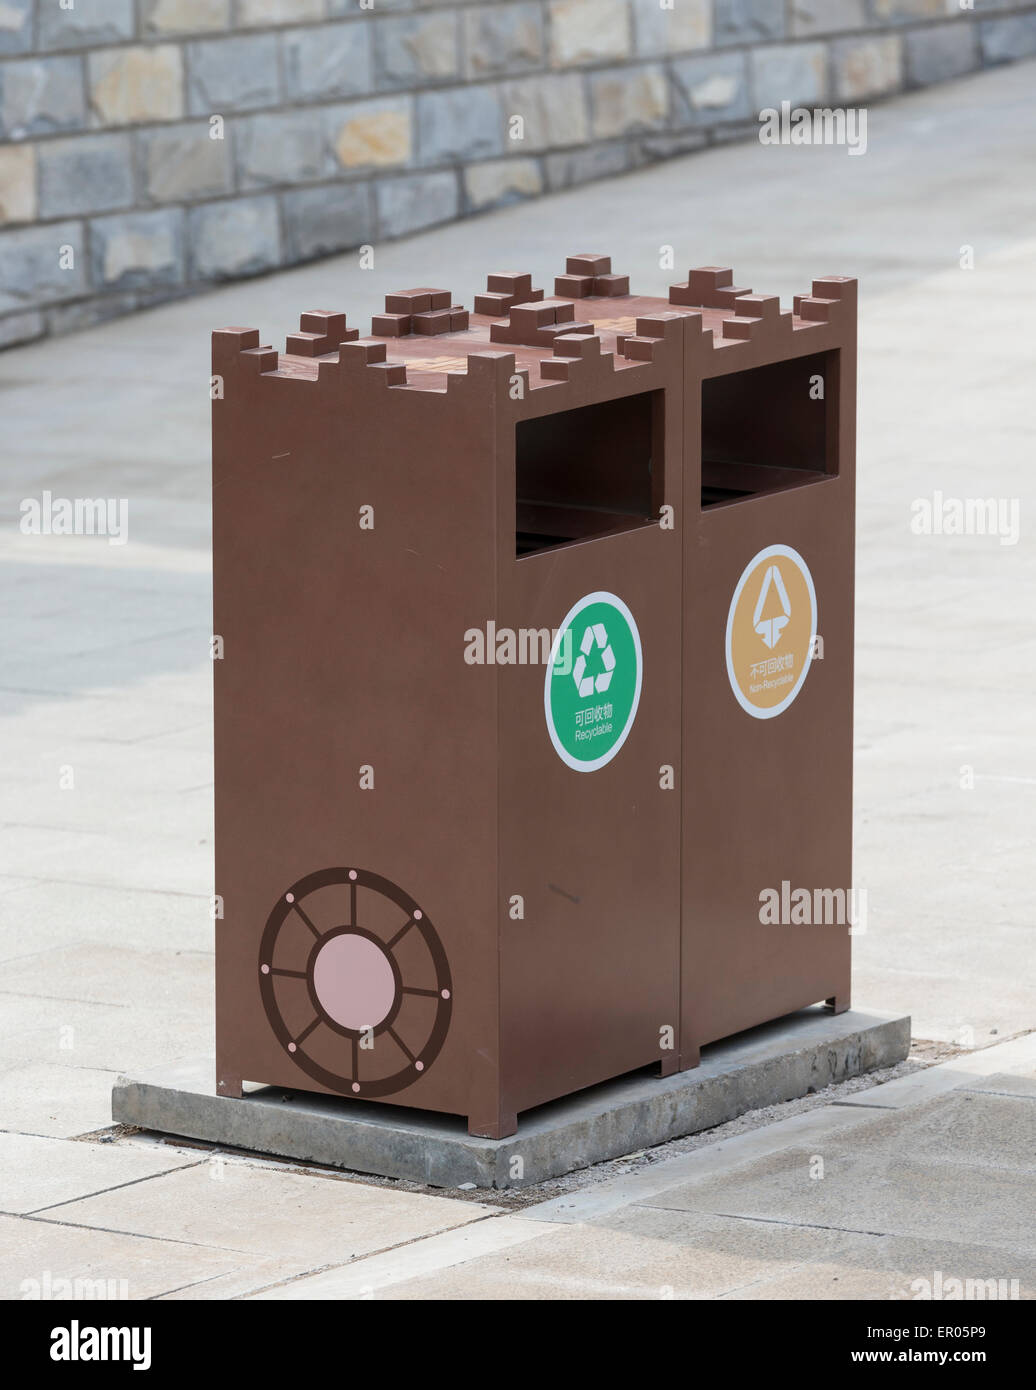 Refuse and recycling bins at the Great Wall of China, themed to resemble battlements on the Wall Stock Photo